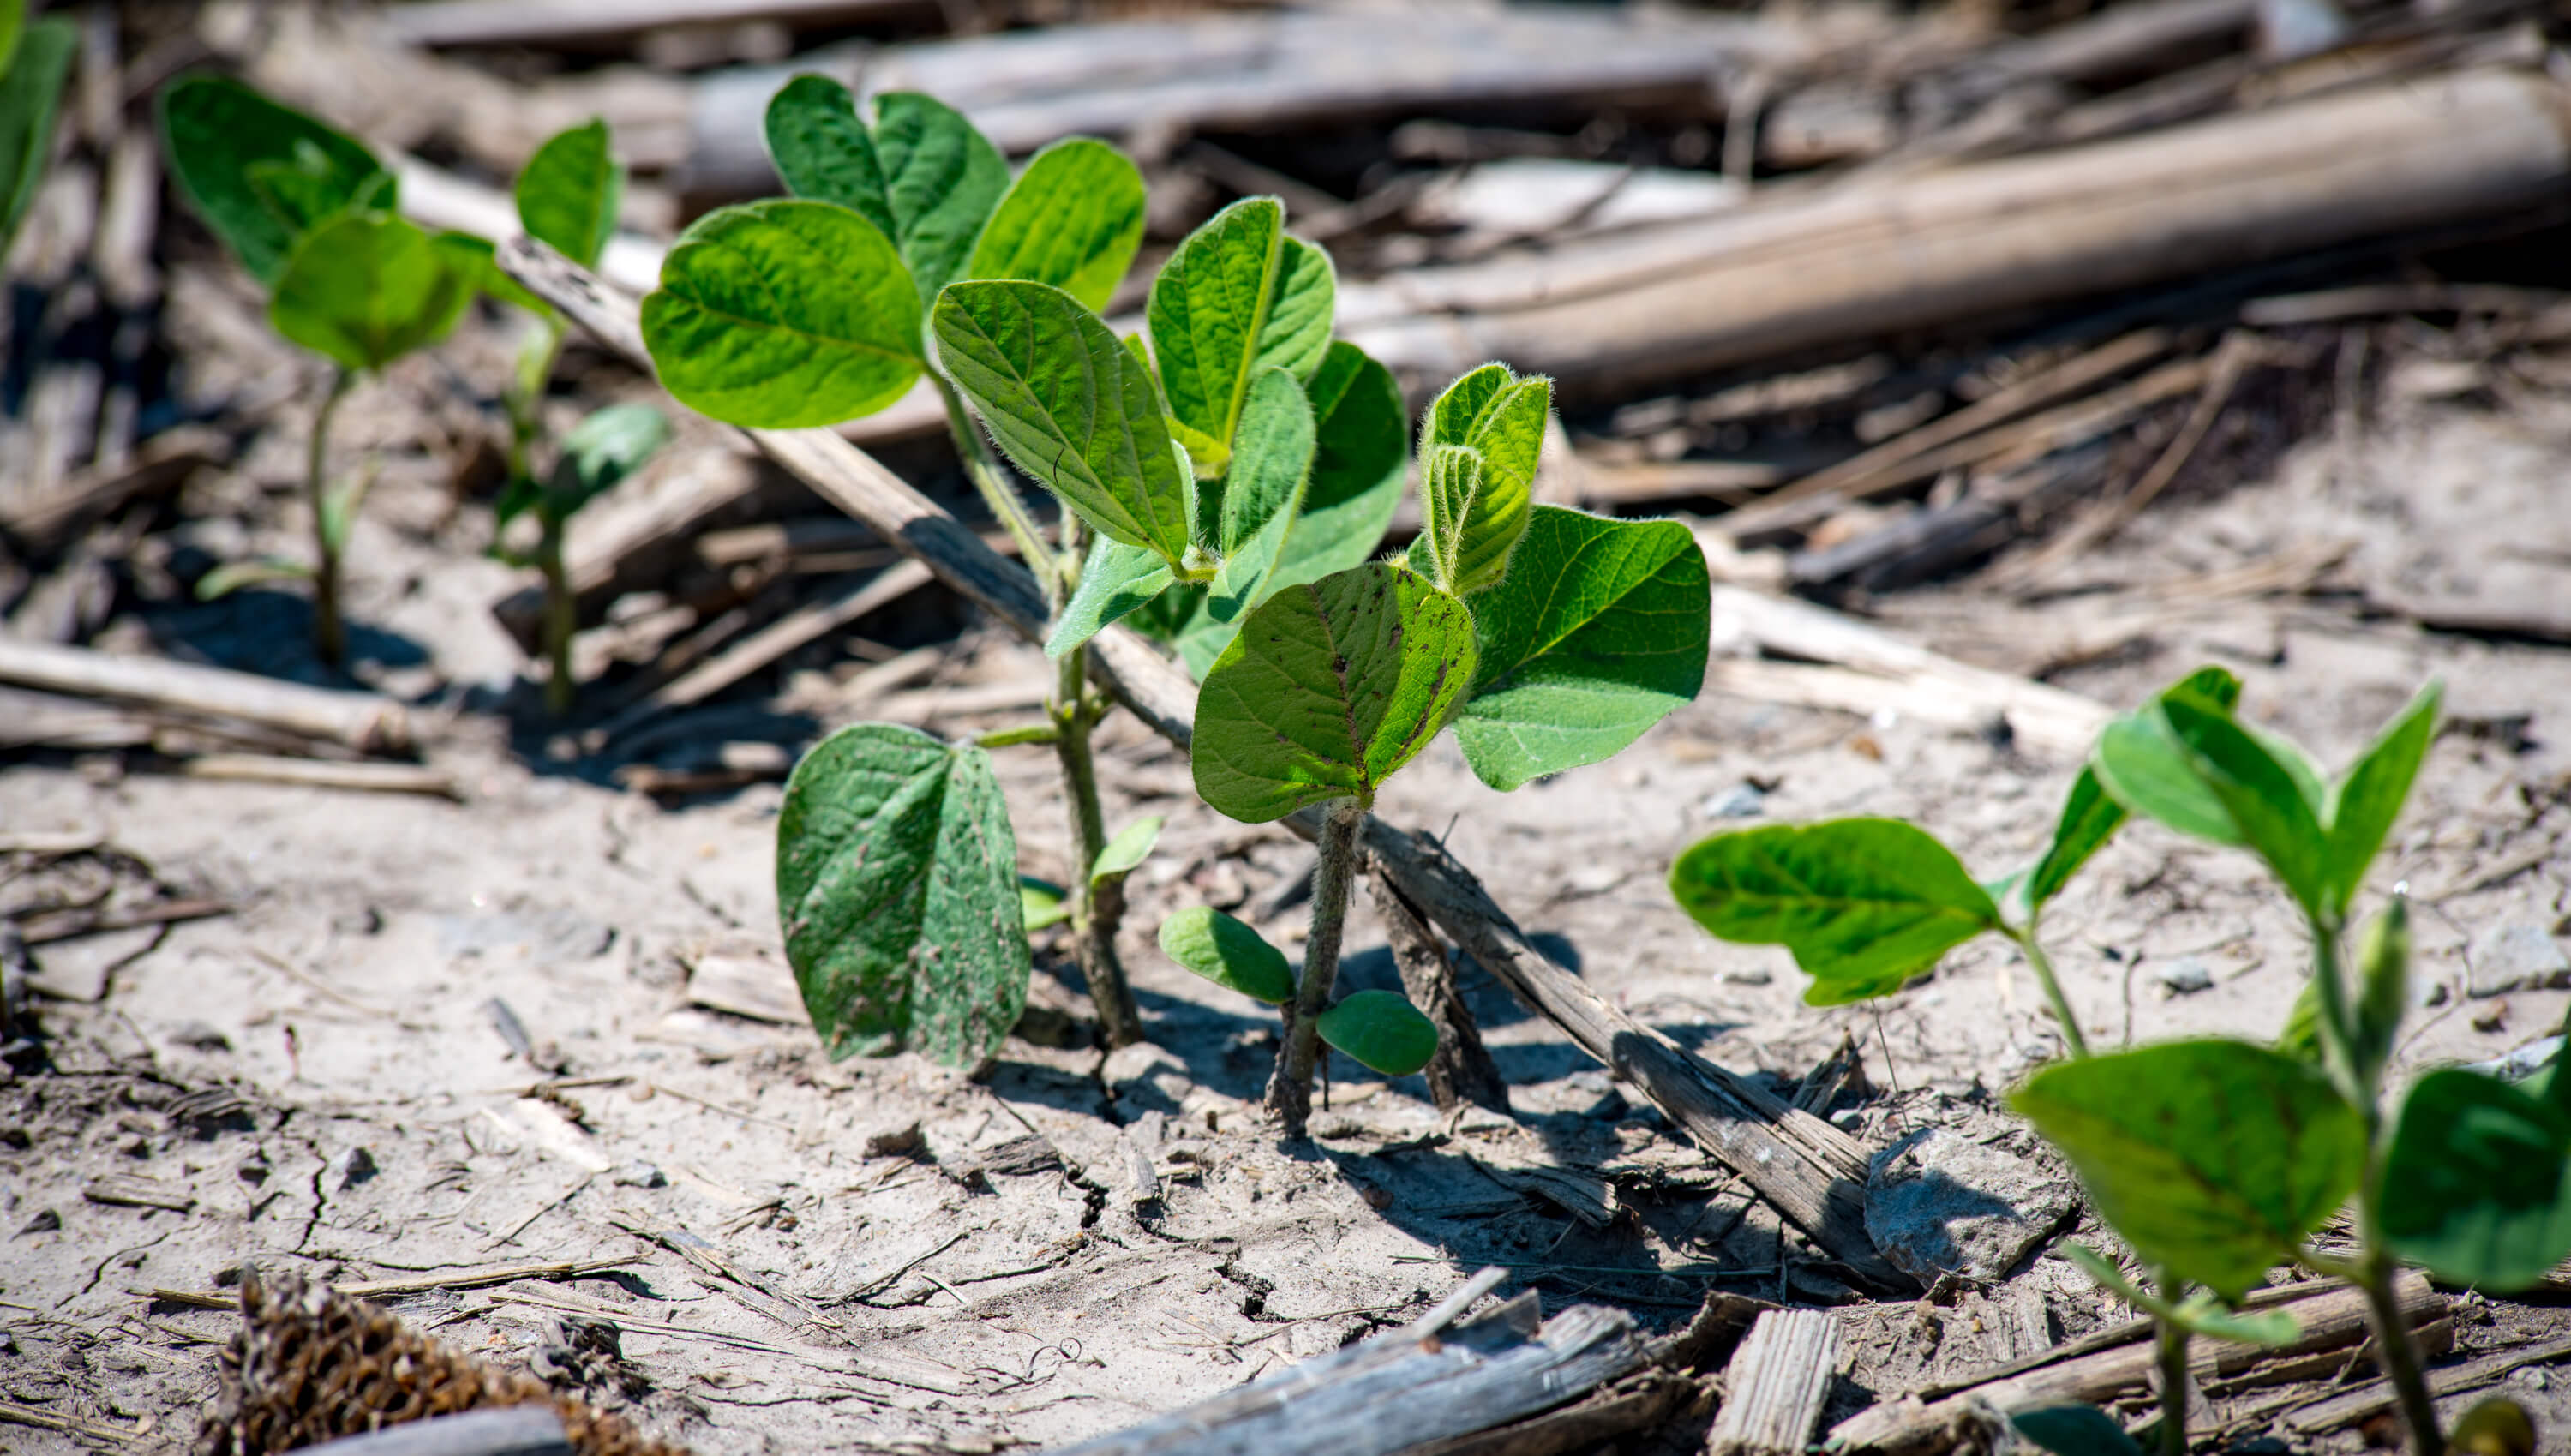 Newly emerging soybean plants with corn stalk on ground